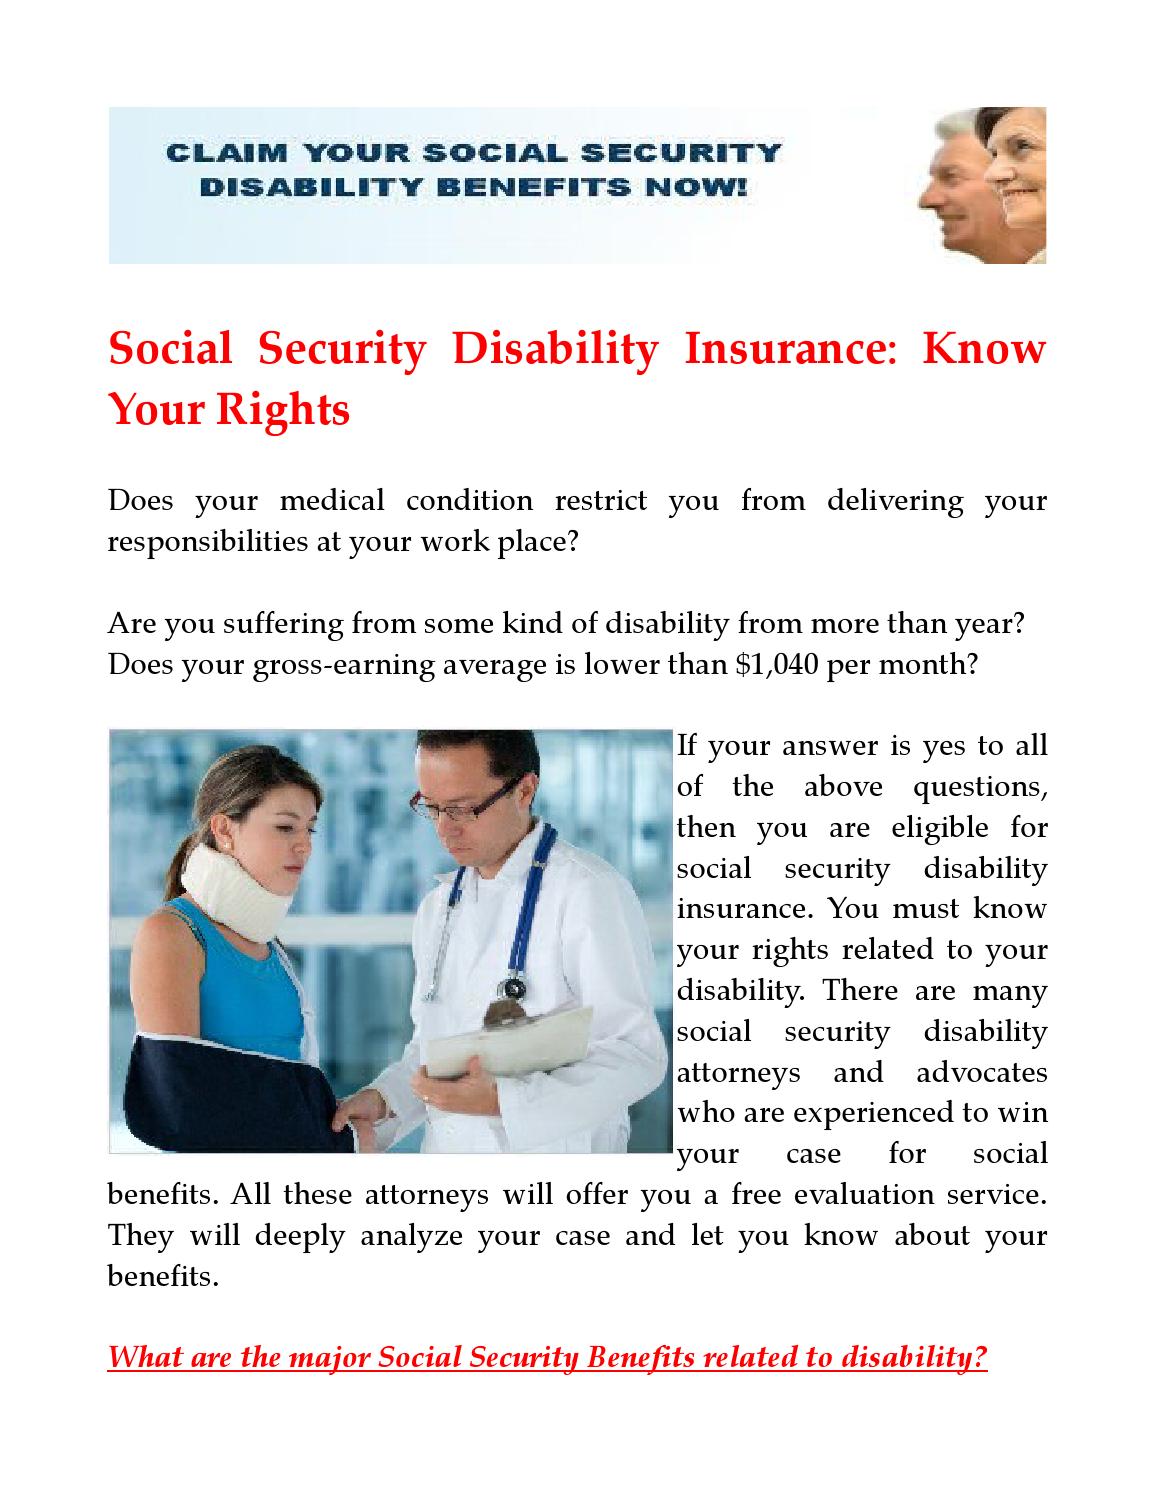 Social Security Disability Insurance by Johnny Watson